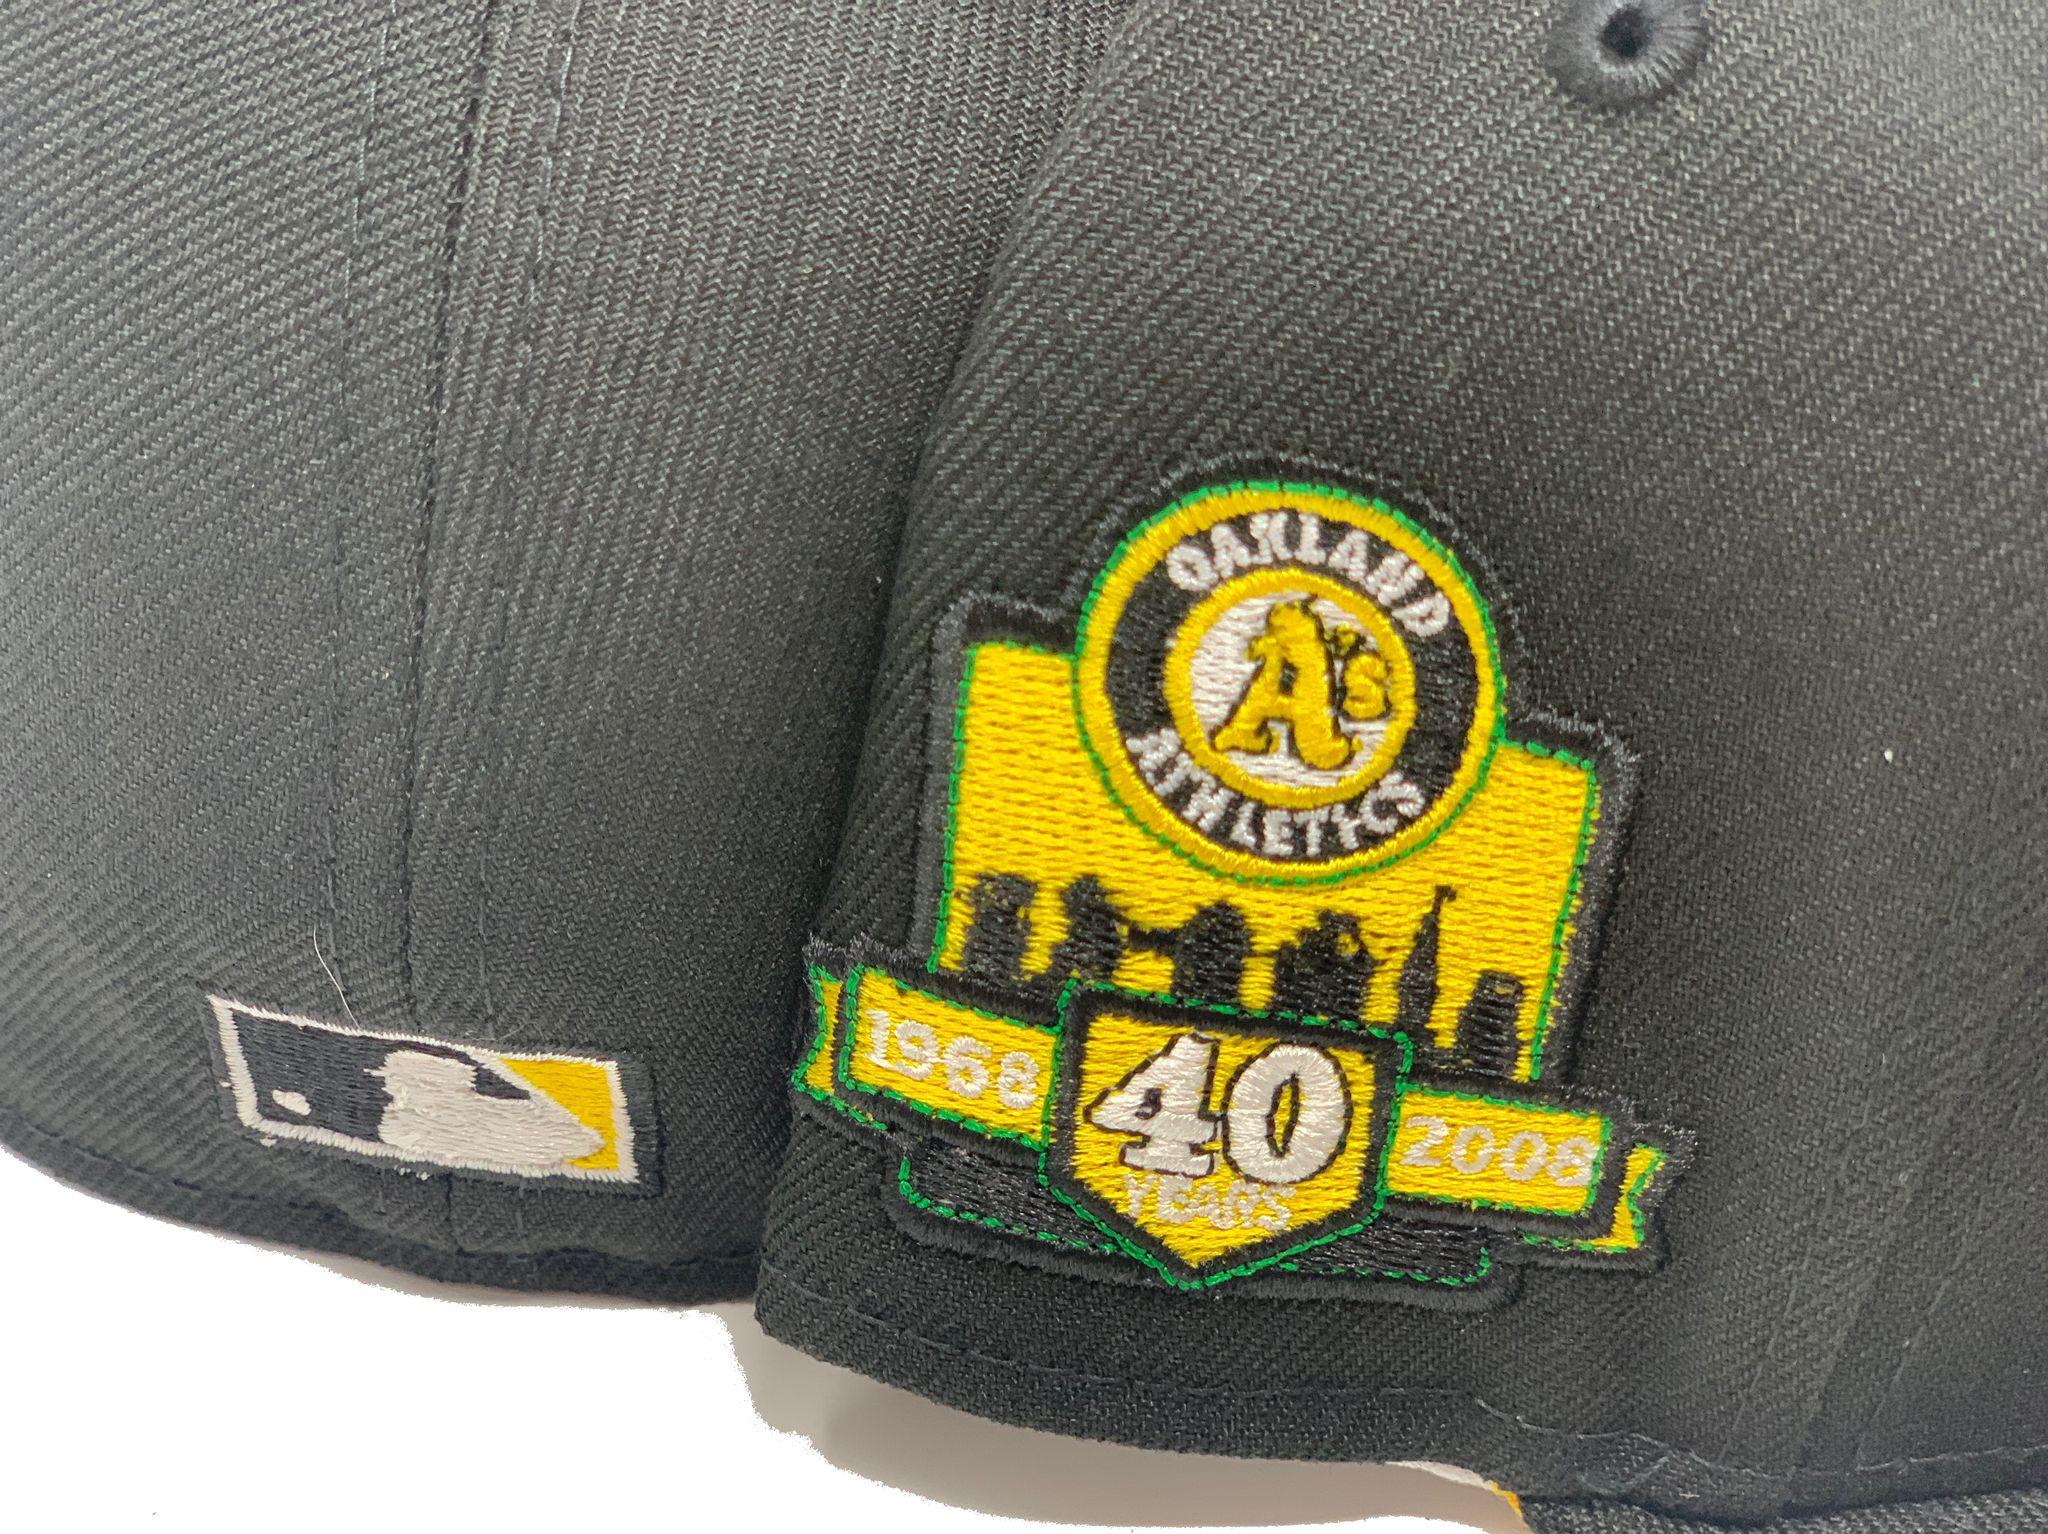 Oakland Athletics 40th Anniversary Team Logo and Commemorative Patch